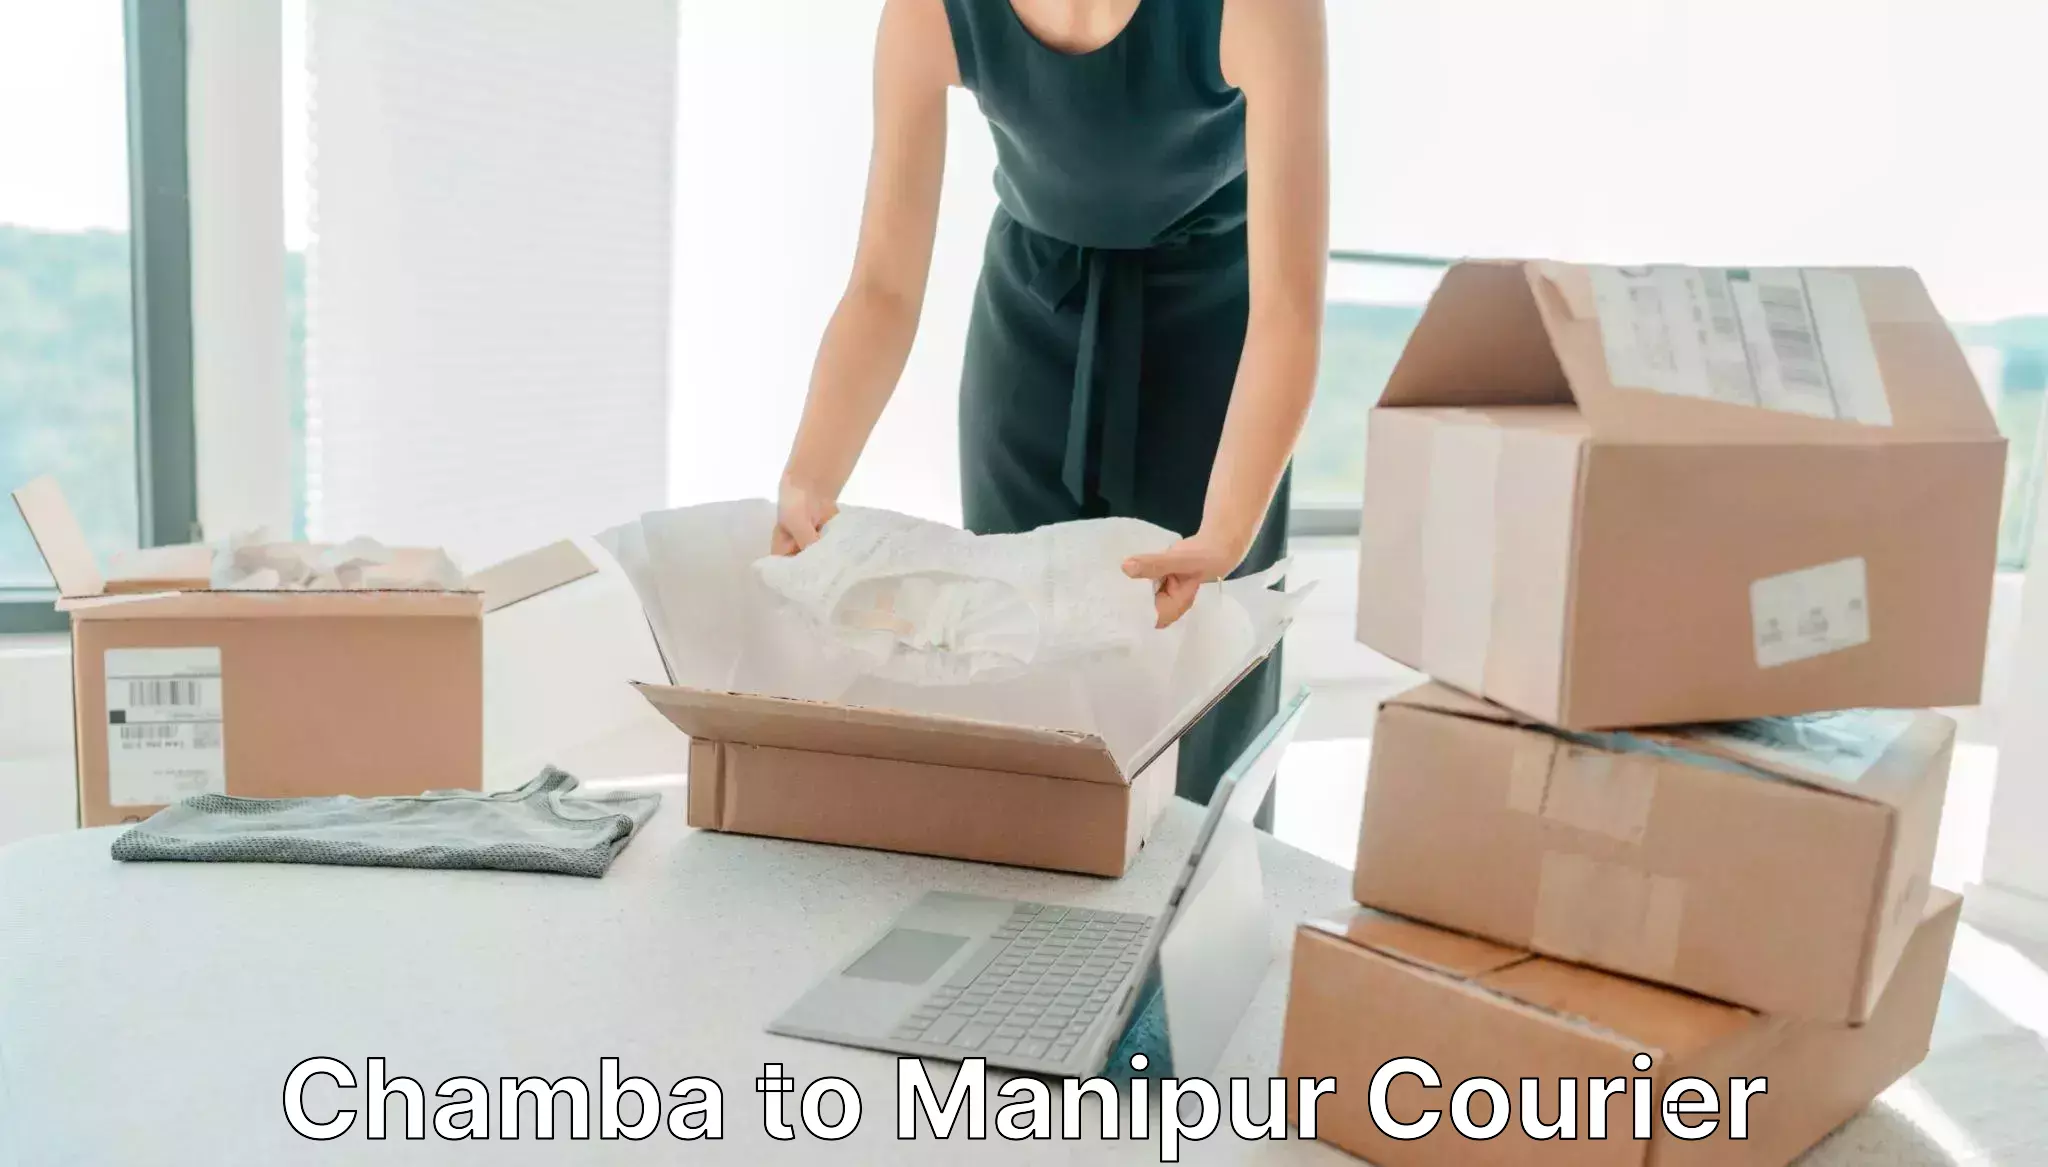 Global shipping networks Chamba to Manipur